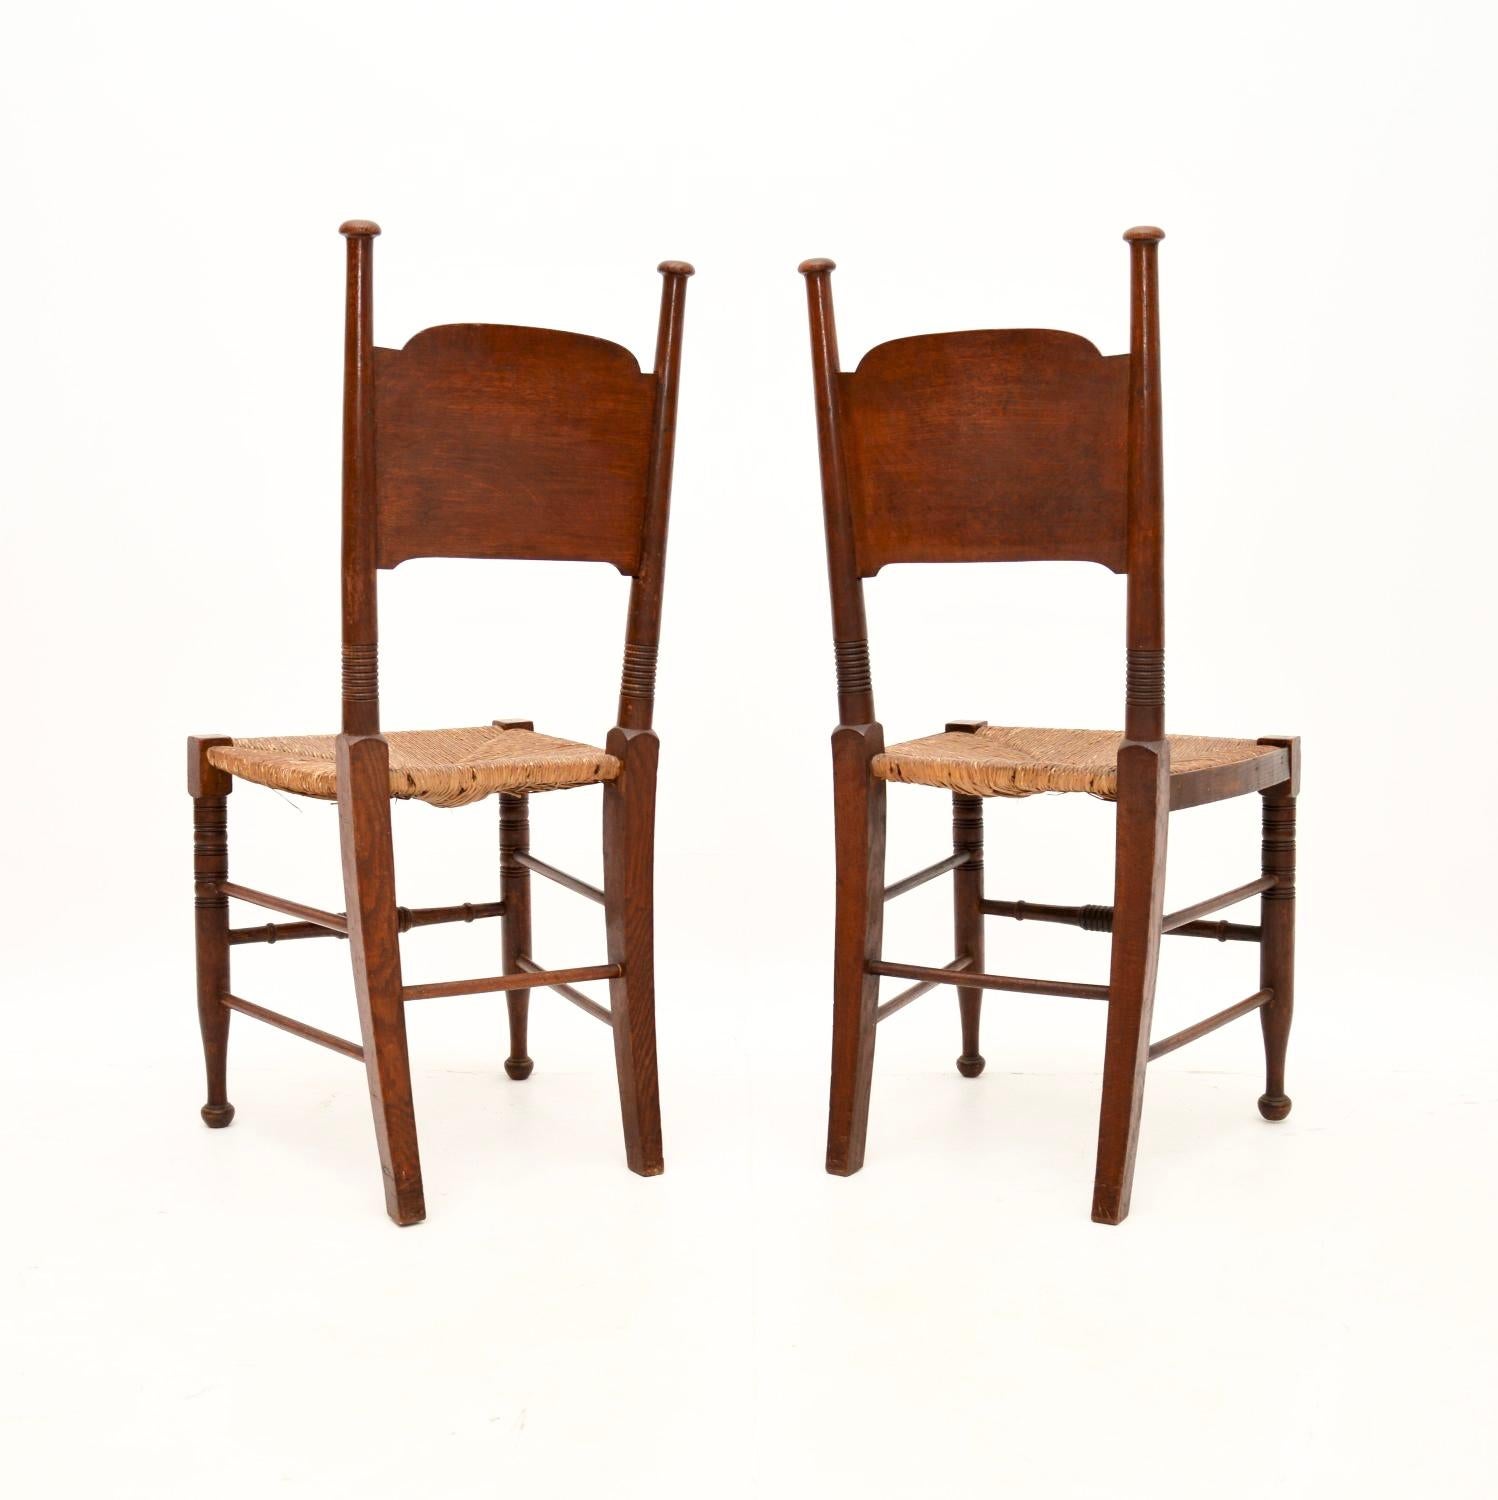 British Pair of Antique Arts and Crafts Side Chairs by William Birch